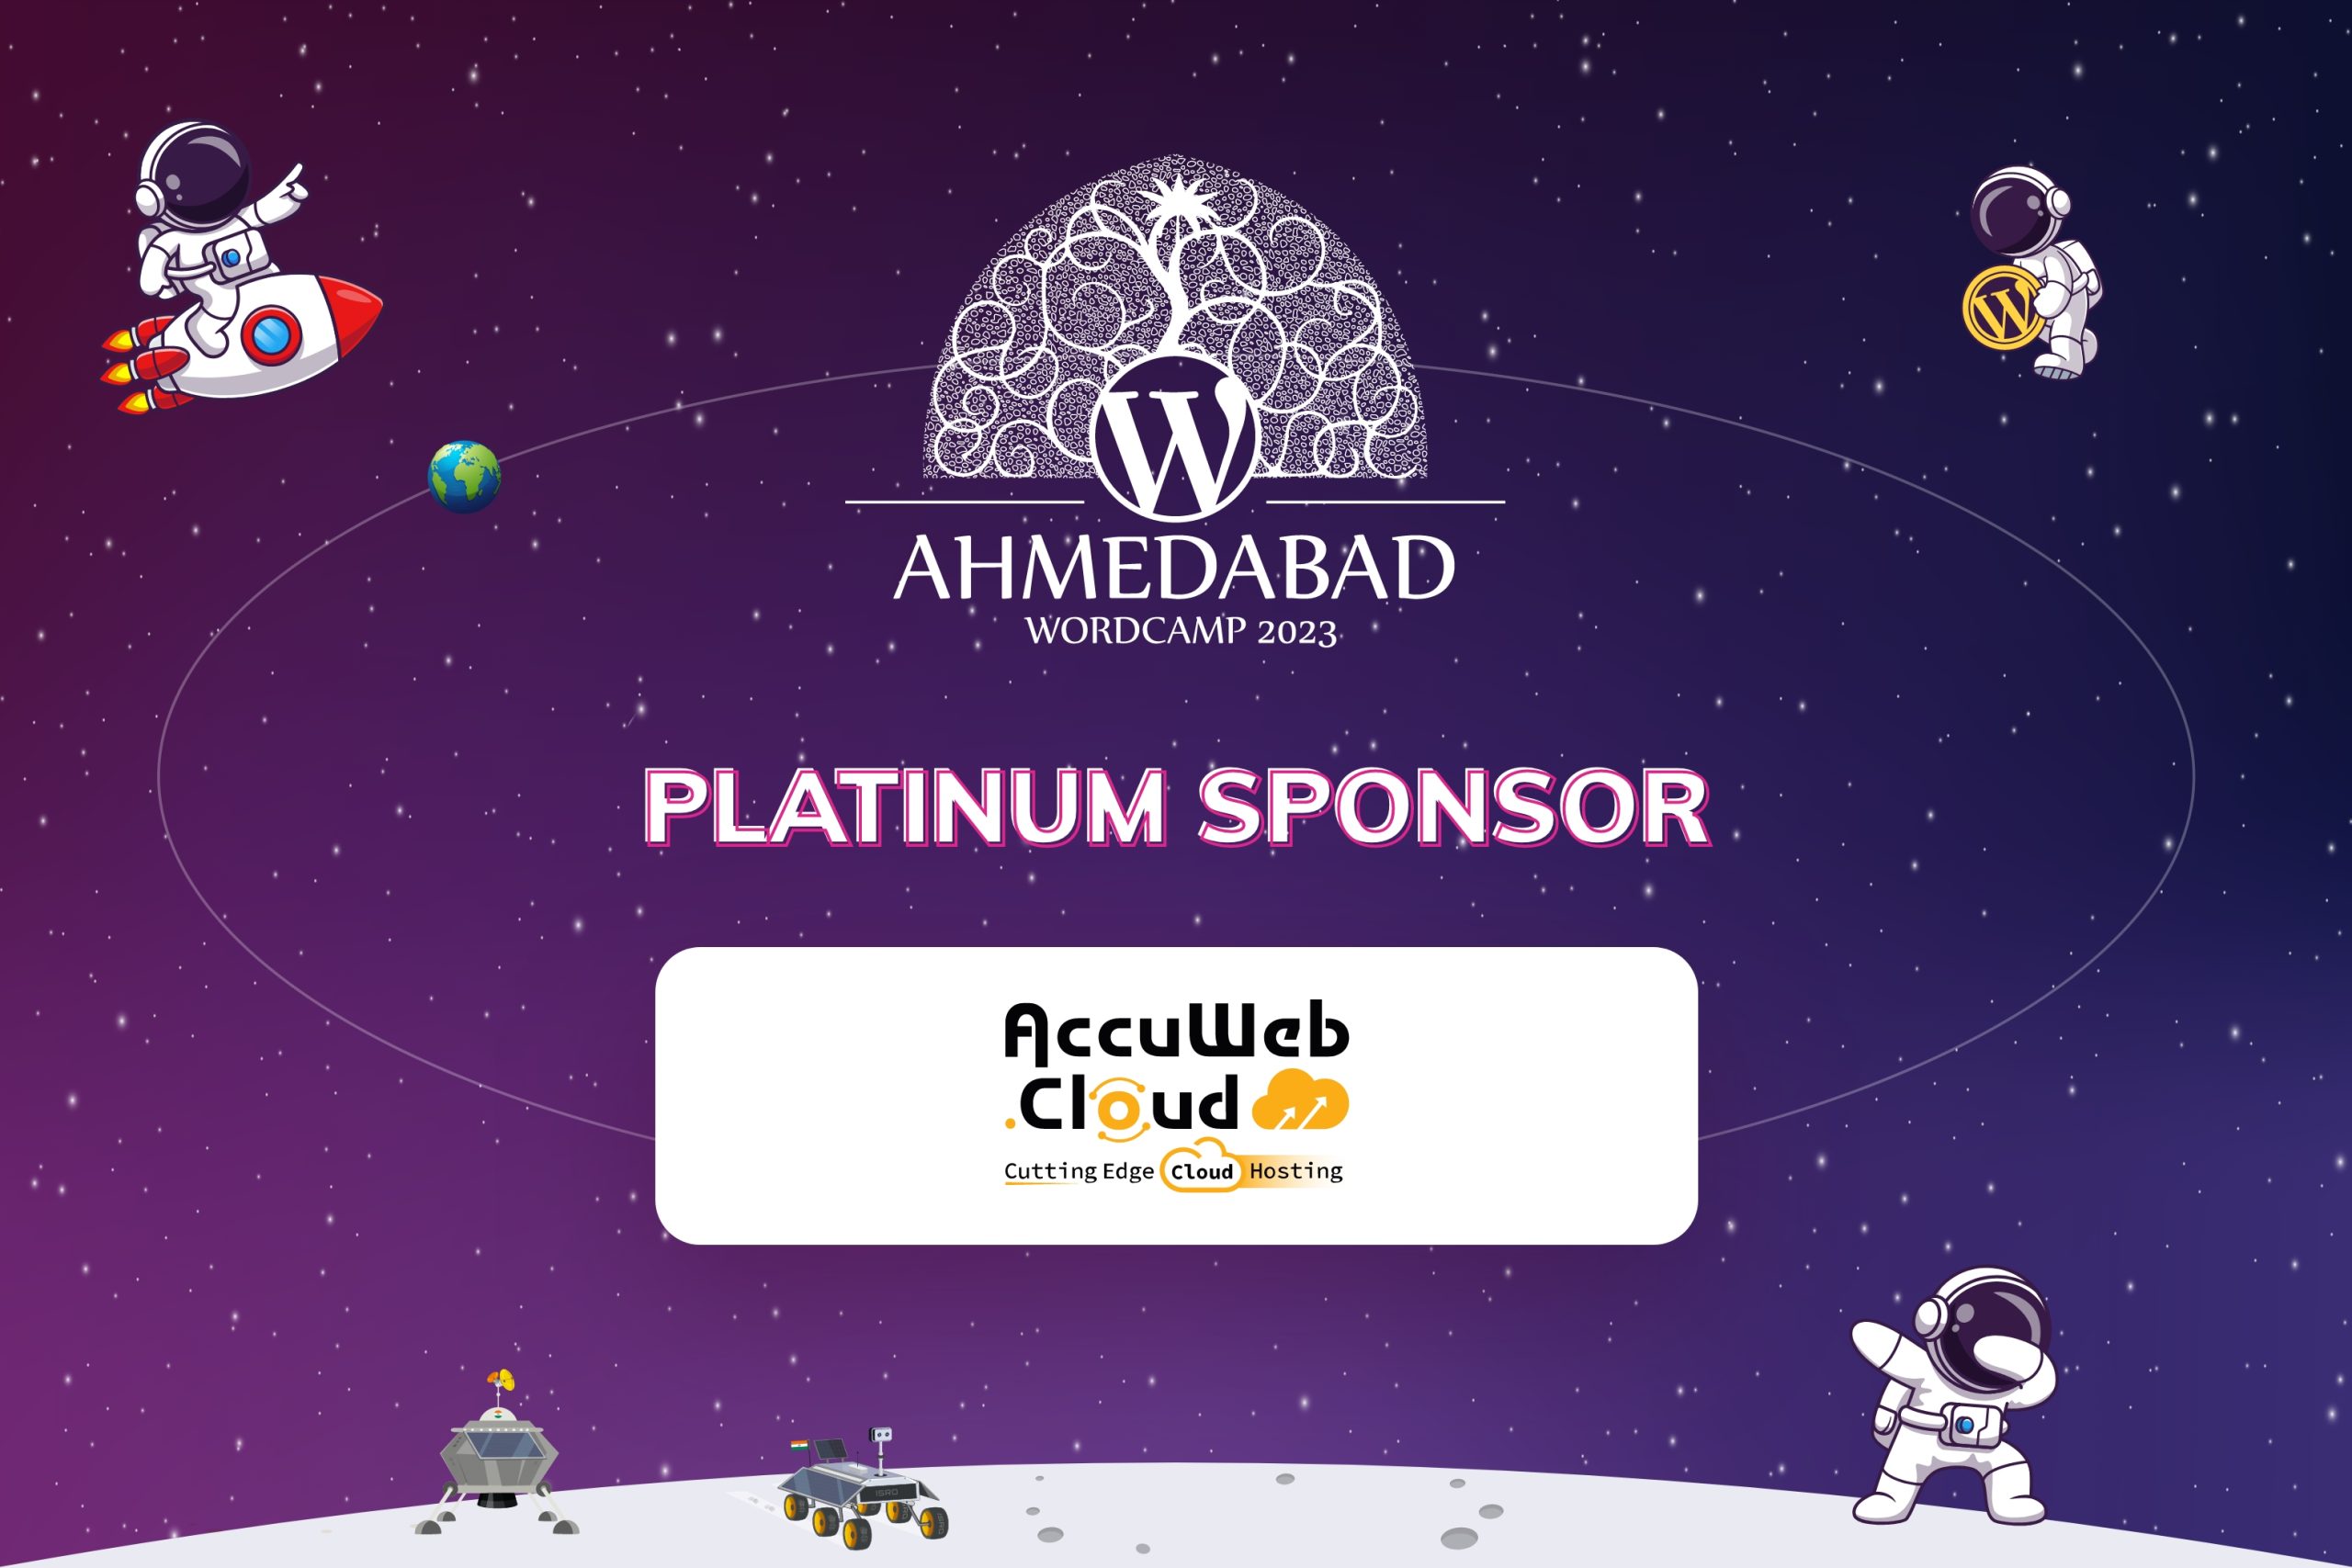 Thank You AccuWeb.Cloud Hosting, for being our Platinum Sponsor